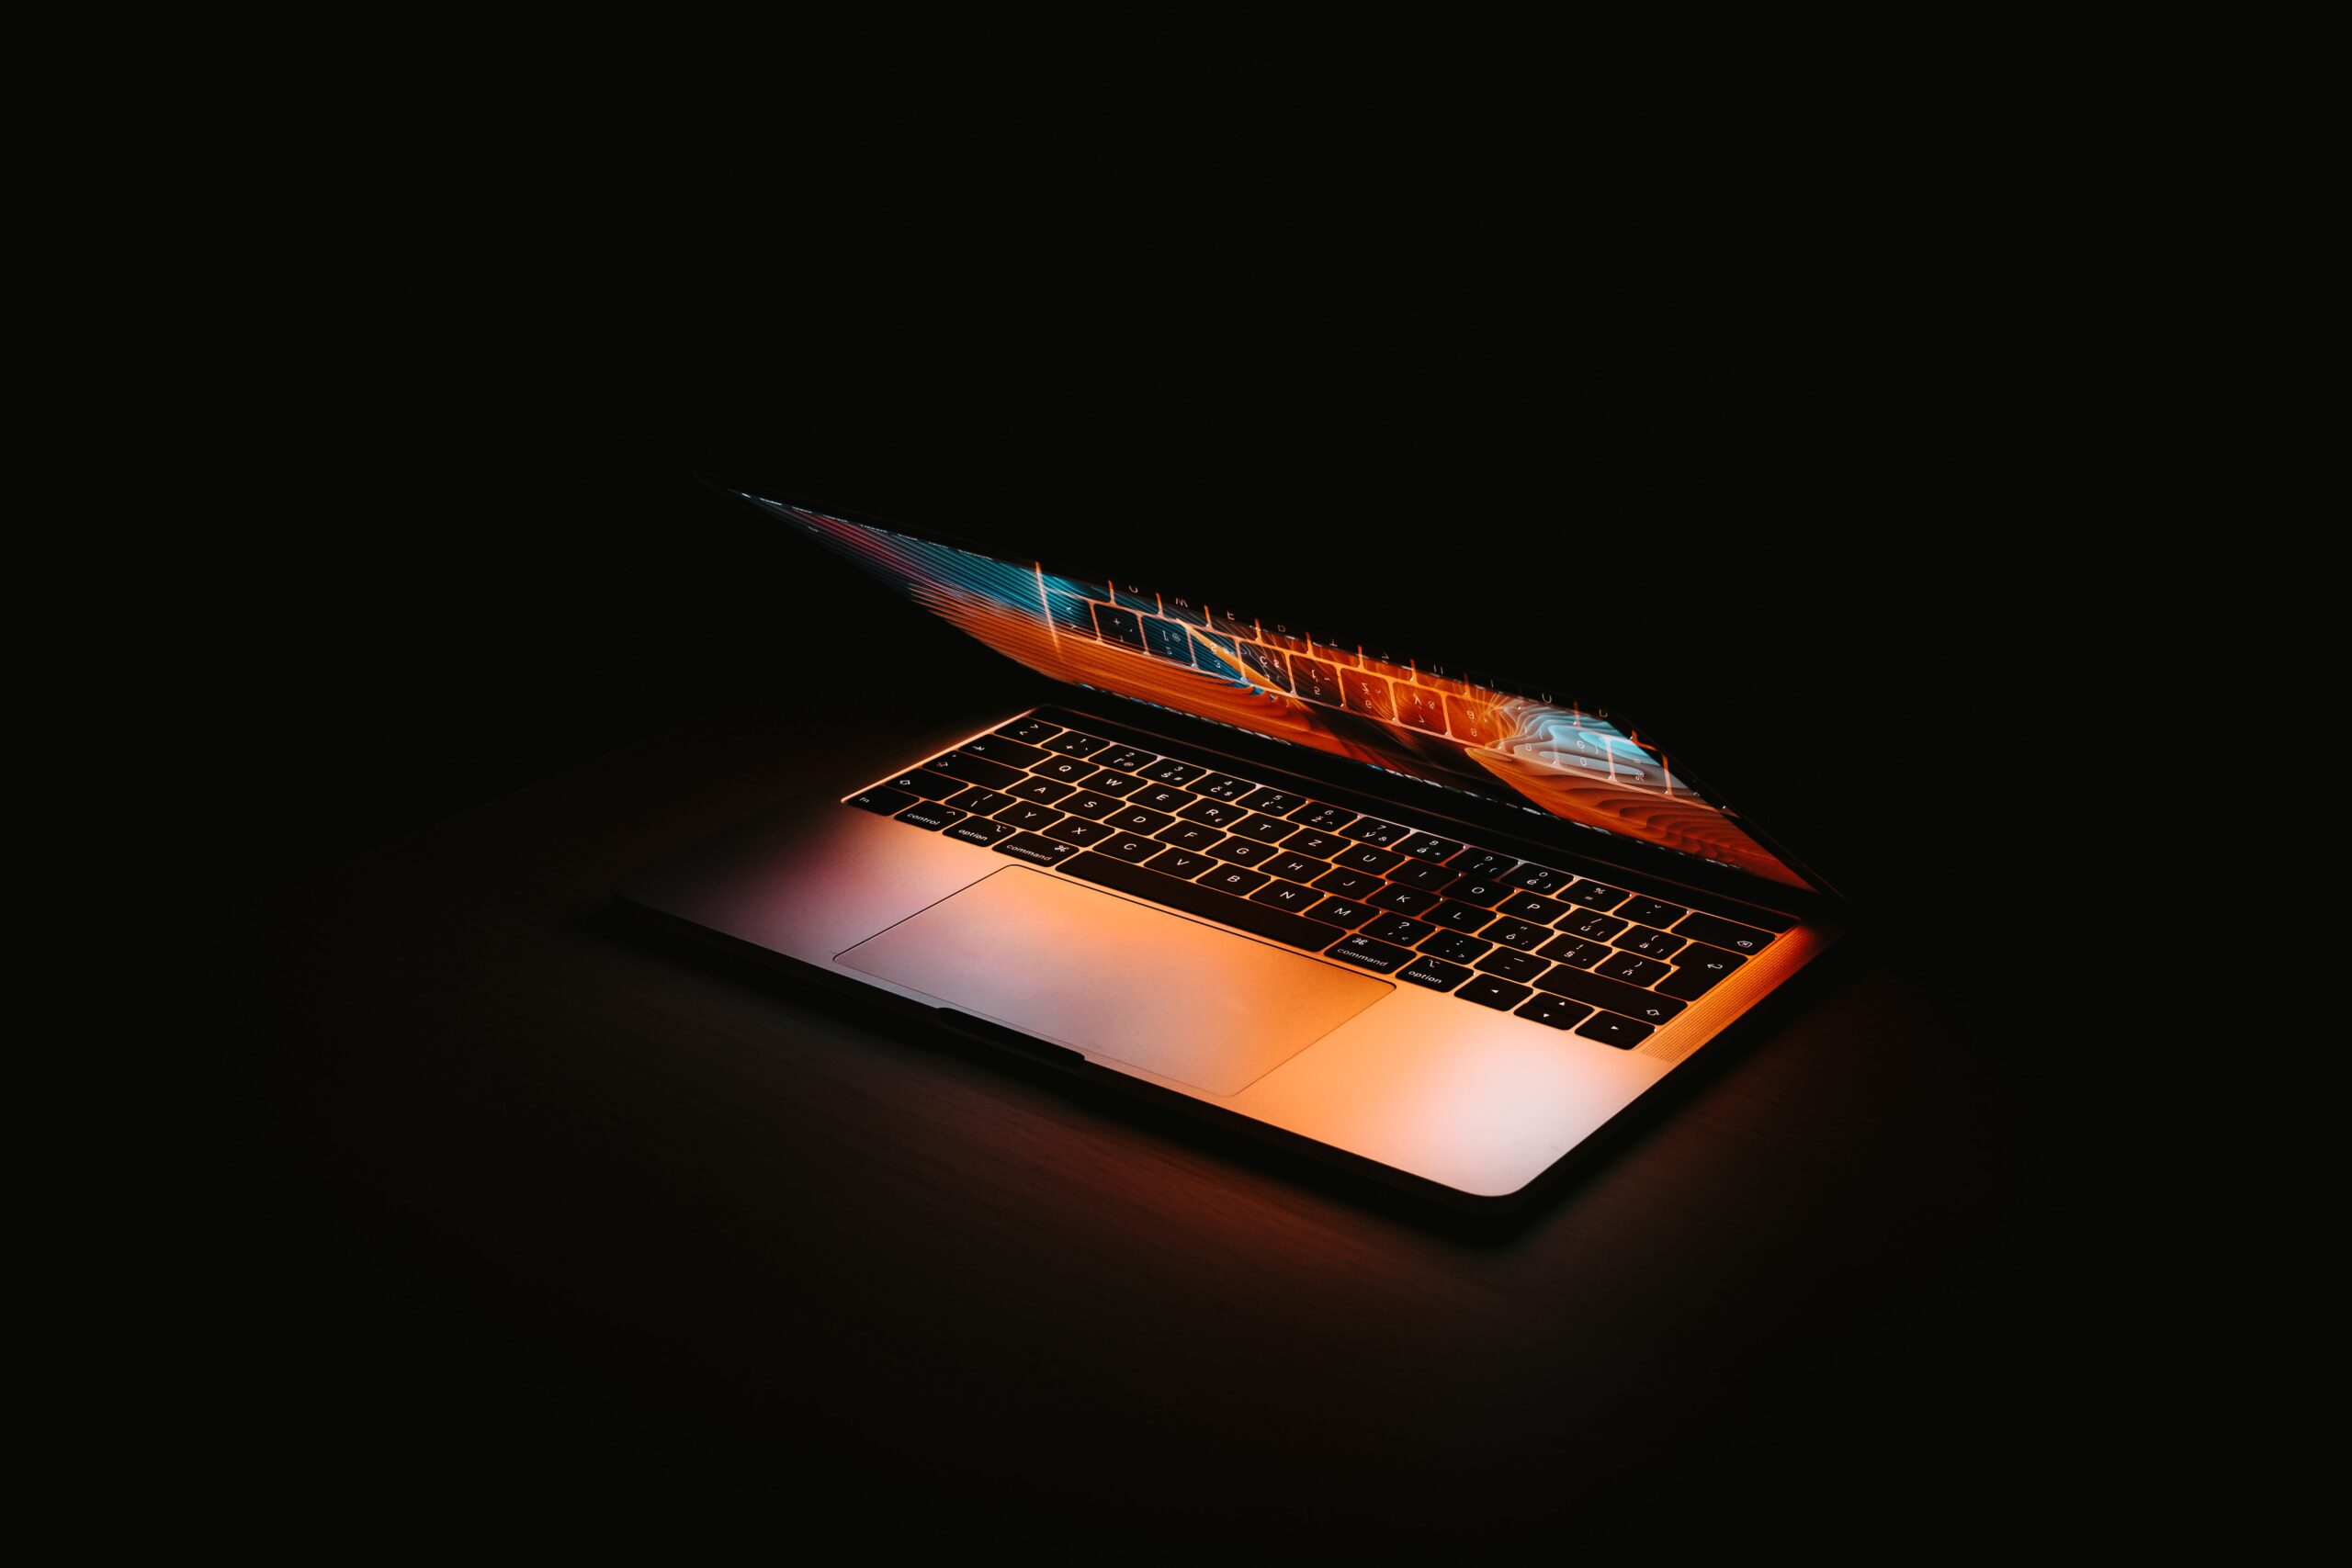 Get ready to witness a touchscreen MacBook Pro with an OLED display